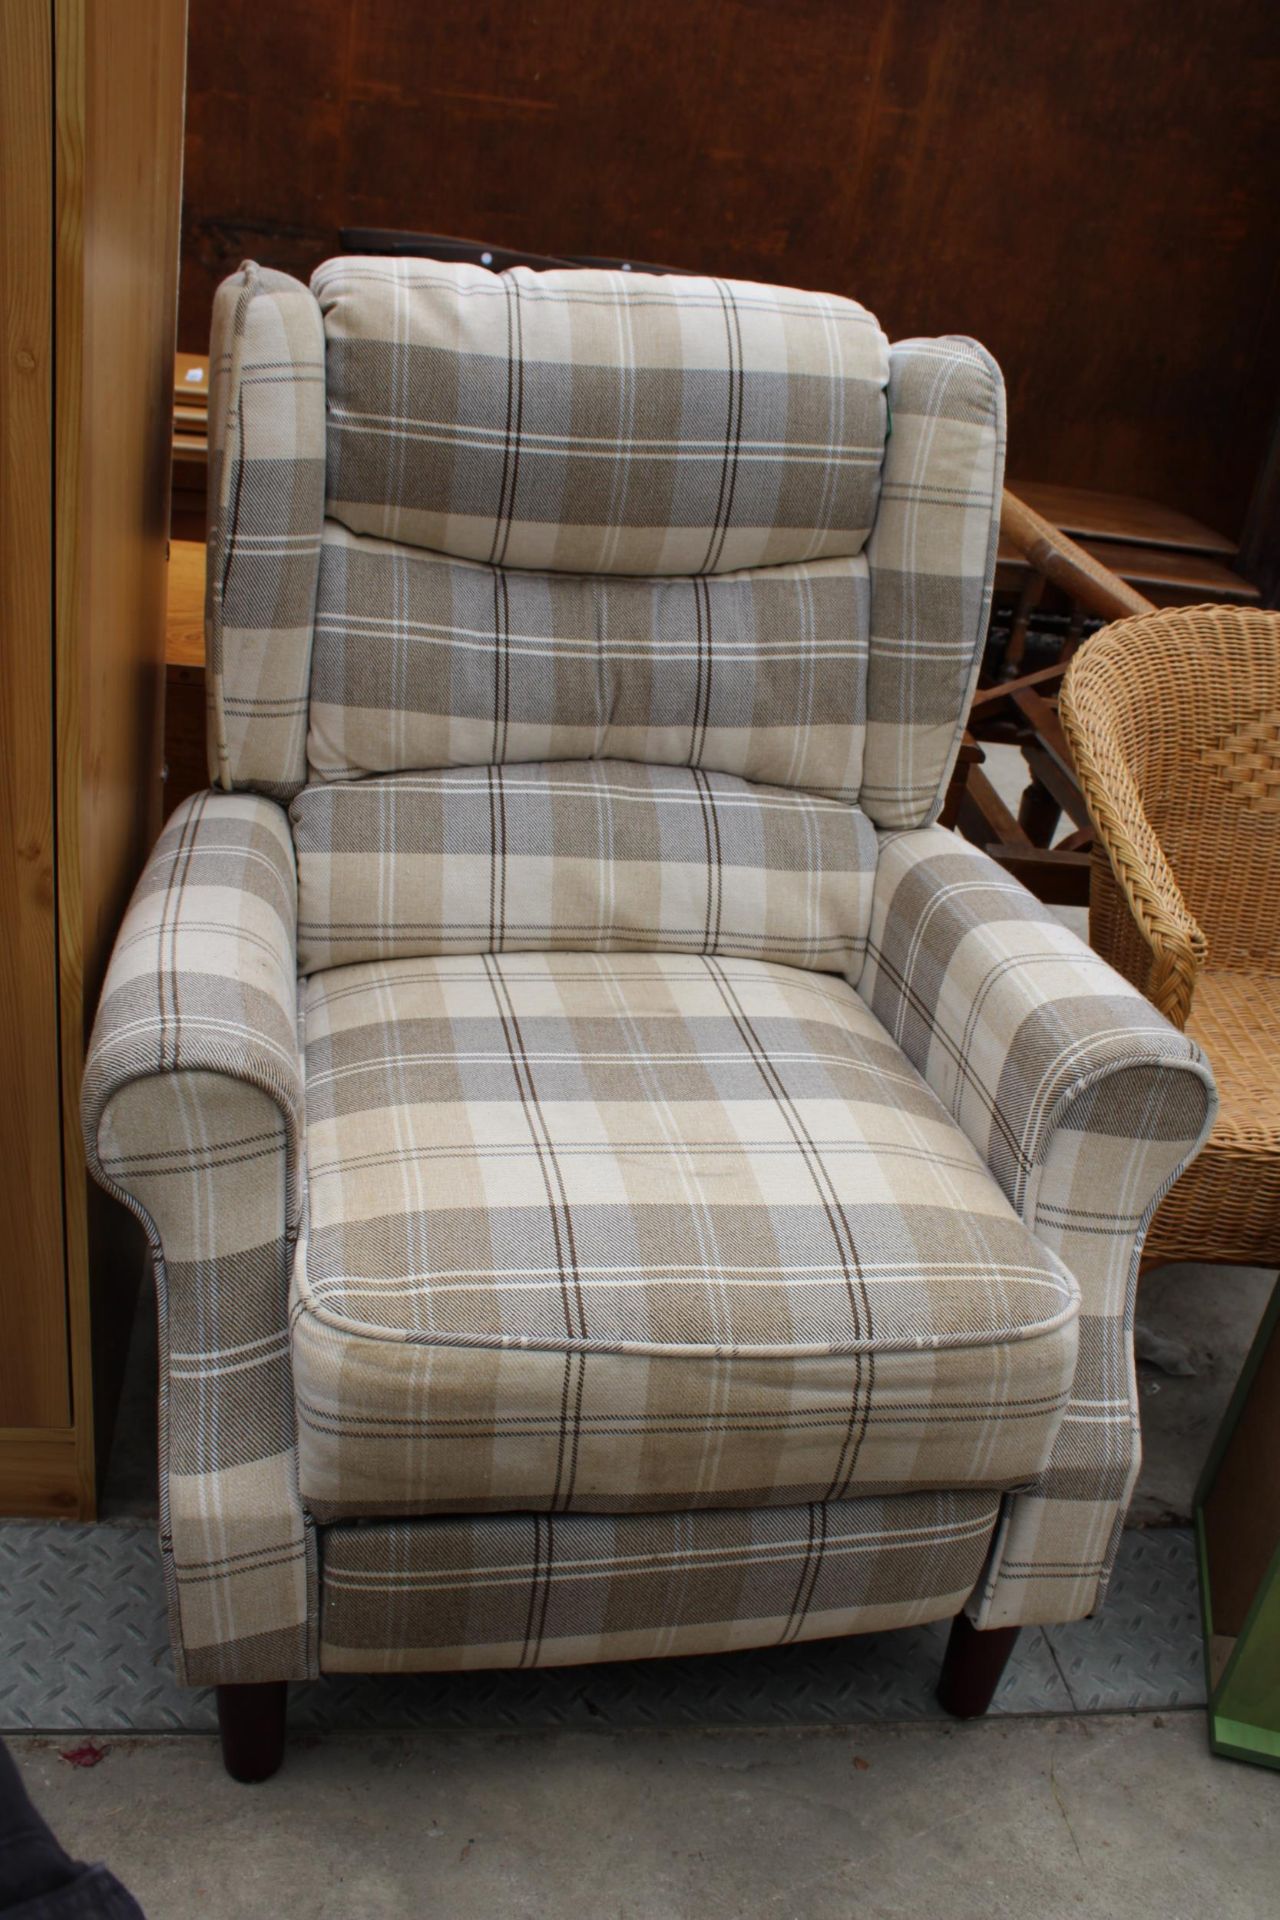 A CHECK WINGED RECLINER CHAIR